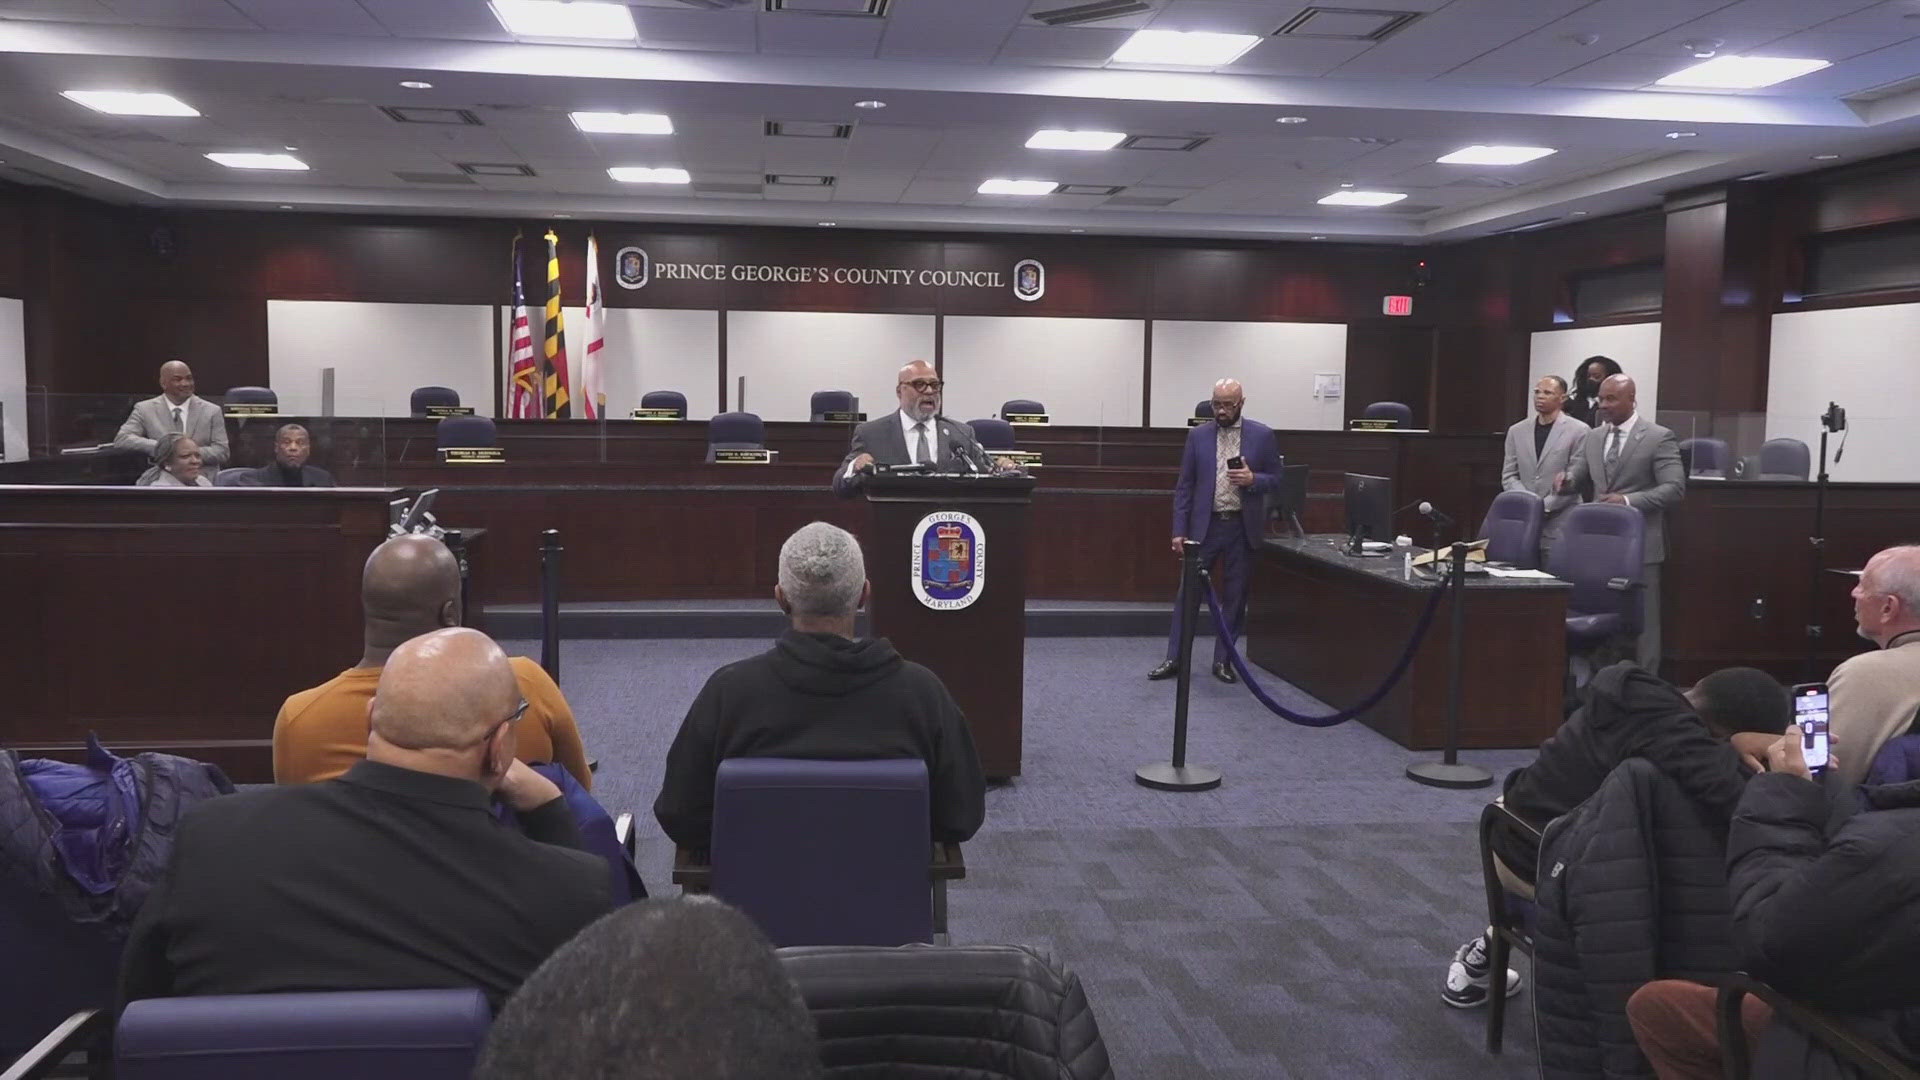 In about 4 hours in Prince George's County, public safety will be top of mind -- as council members discuss two bills that could have a big impact on the community.